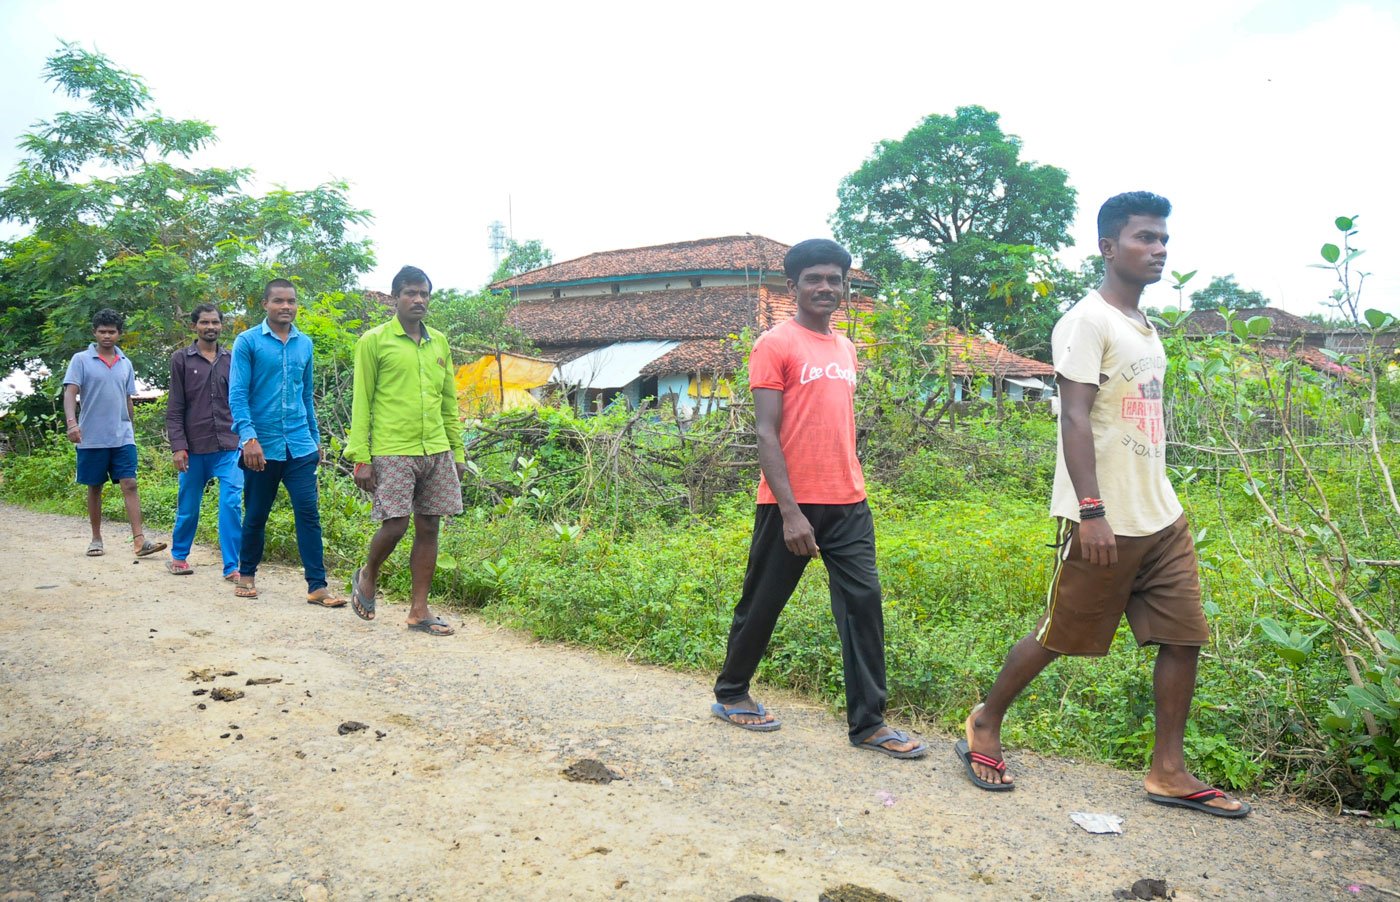 Vijay Koreti (in the red t-shirt), Laxman Shahare (in the green shirt) and others from Zashinagar who walked about 800 kilometres to get home from Telangana's Komaram Bheem district during the lockdown

